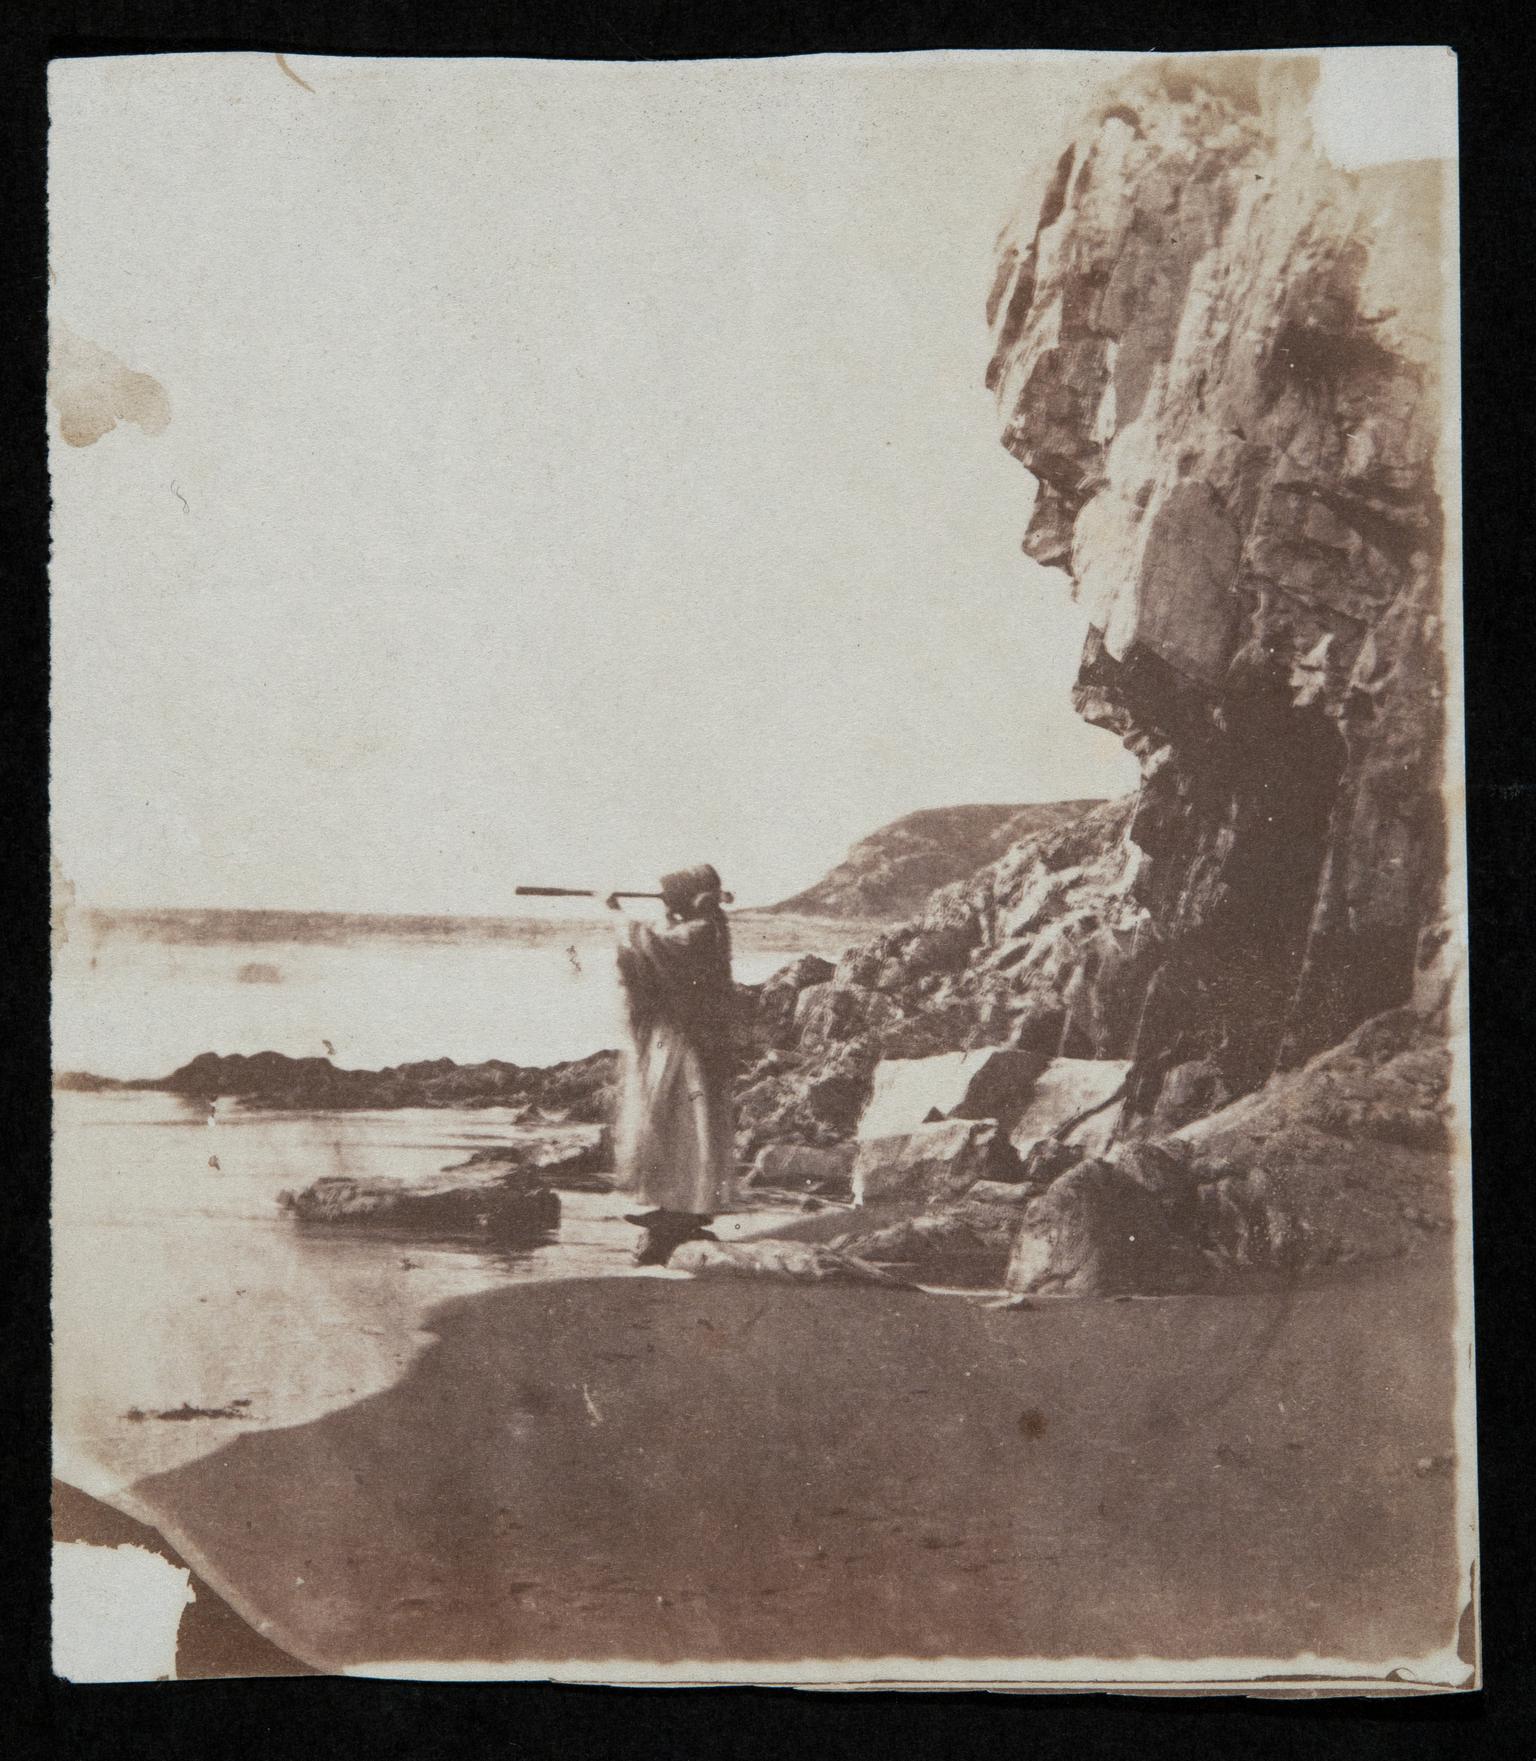 Thereza at Caswell Bay with telescope, photograph